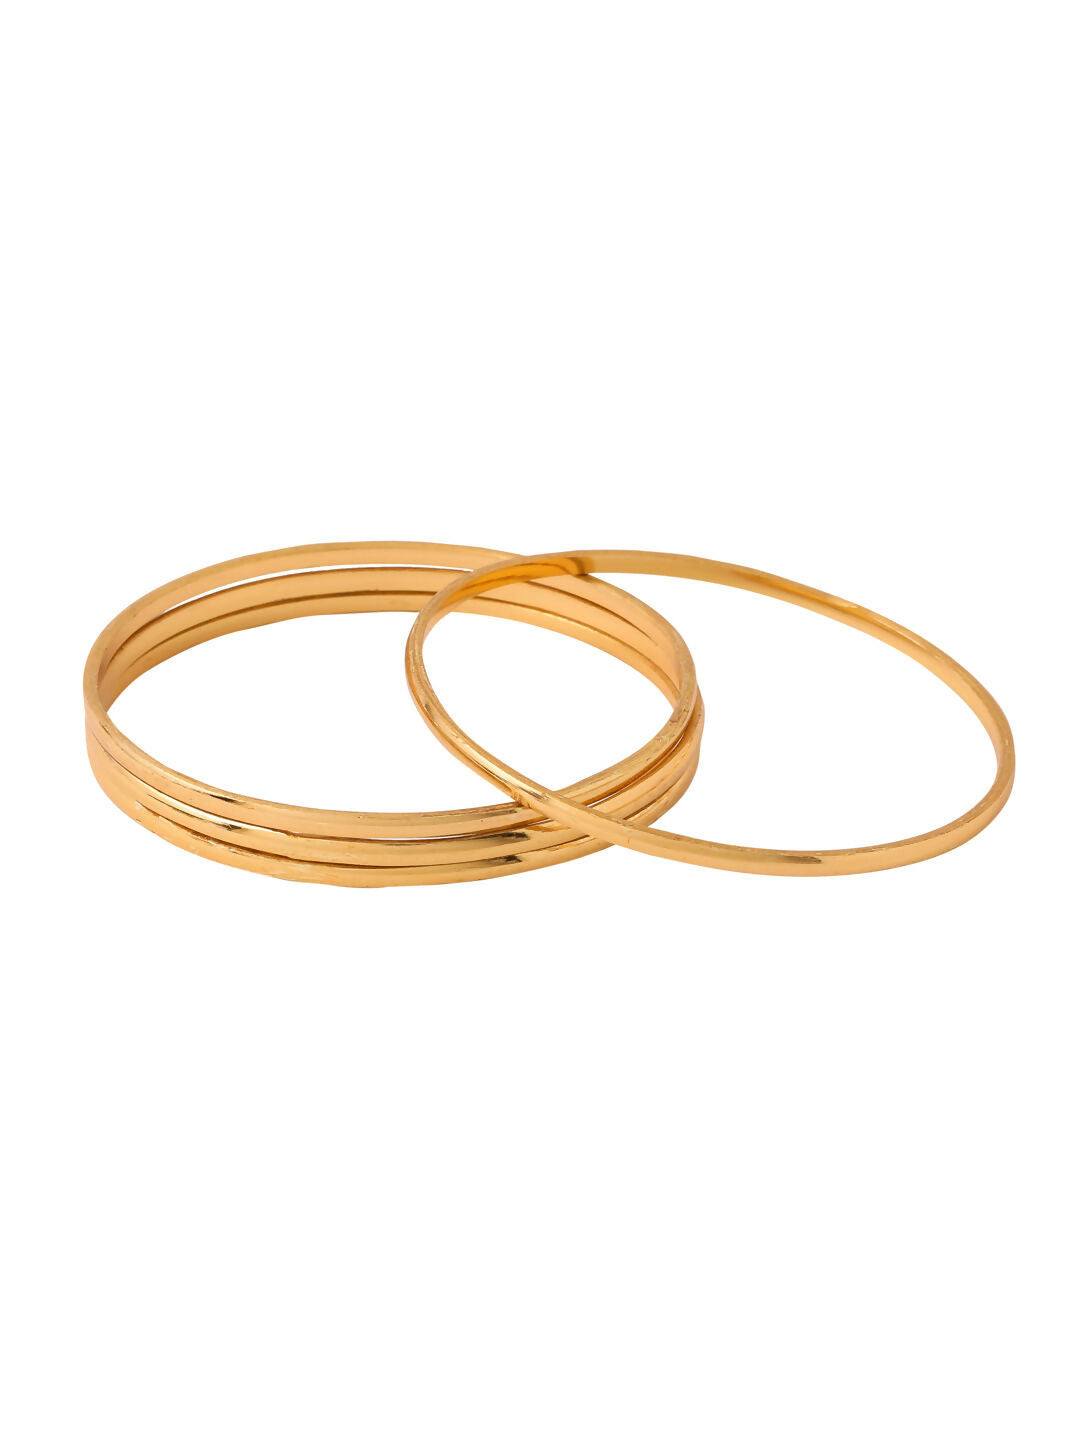 NVR Women's Set of 4 Gold-Plated Traditional Daily Use Bangles - Distacart